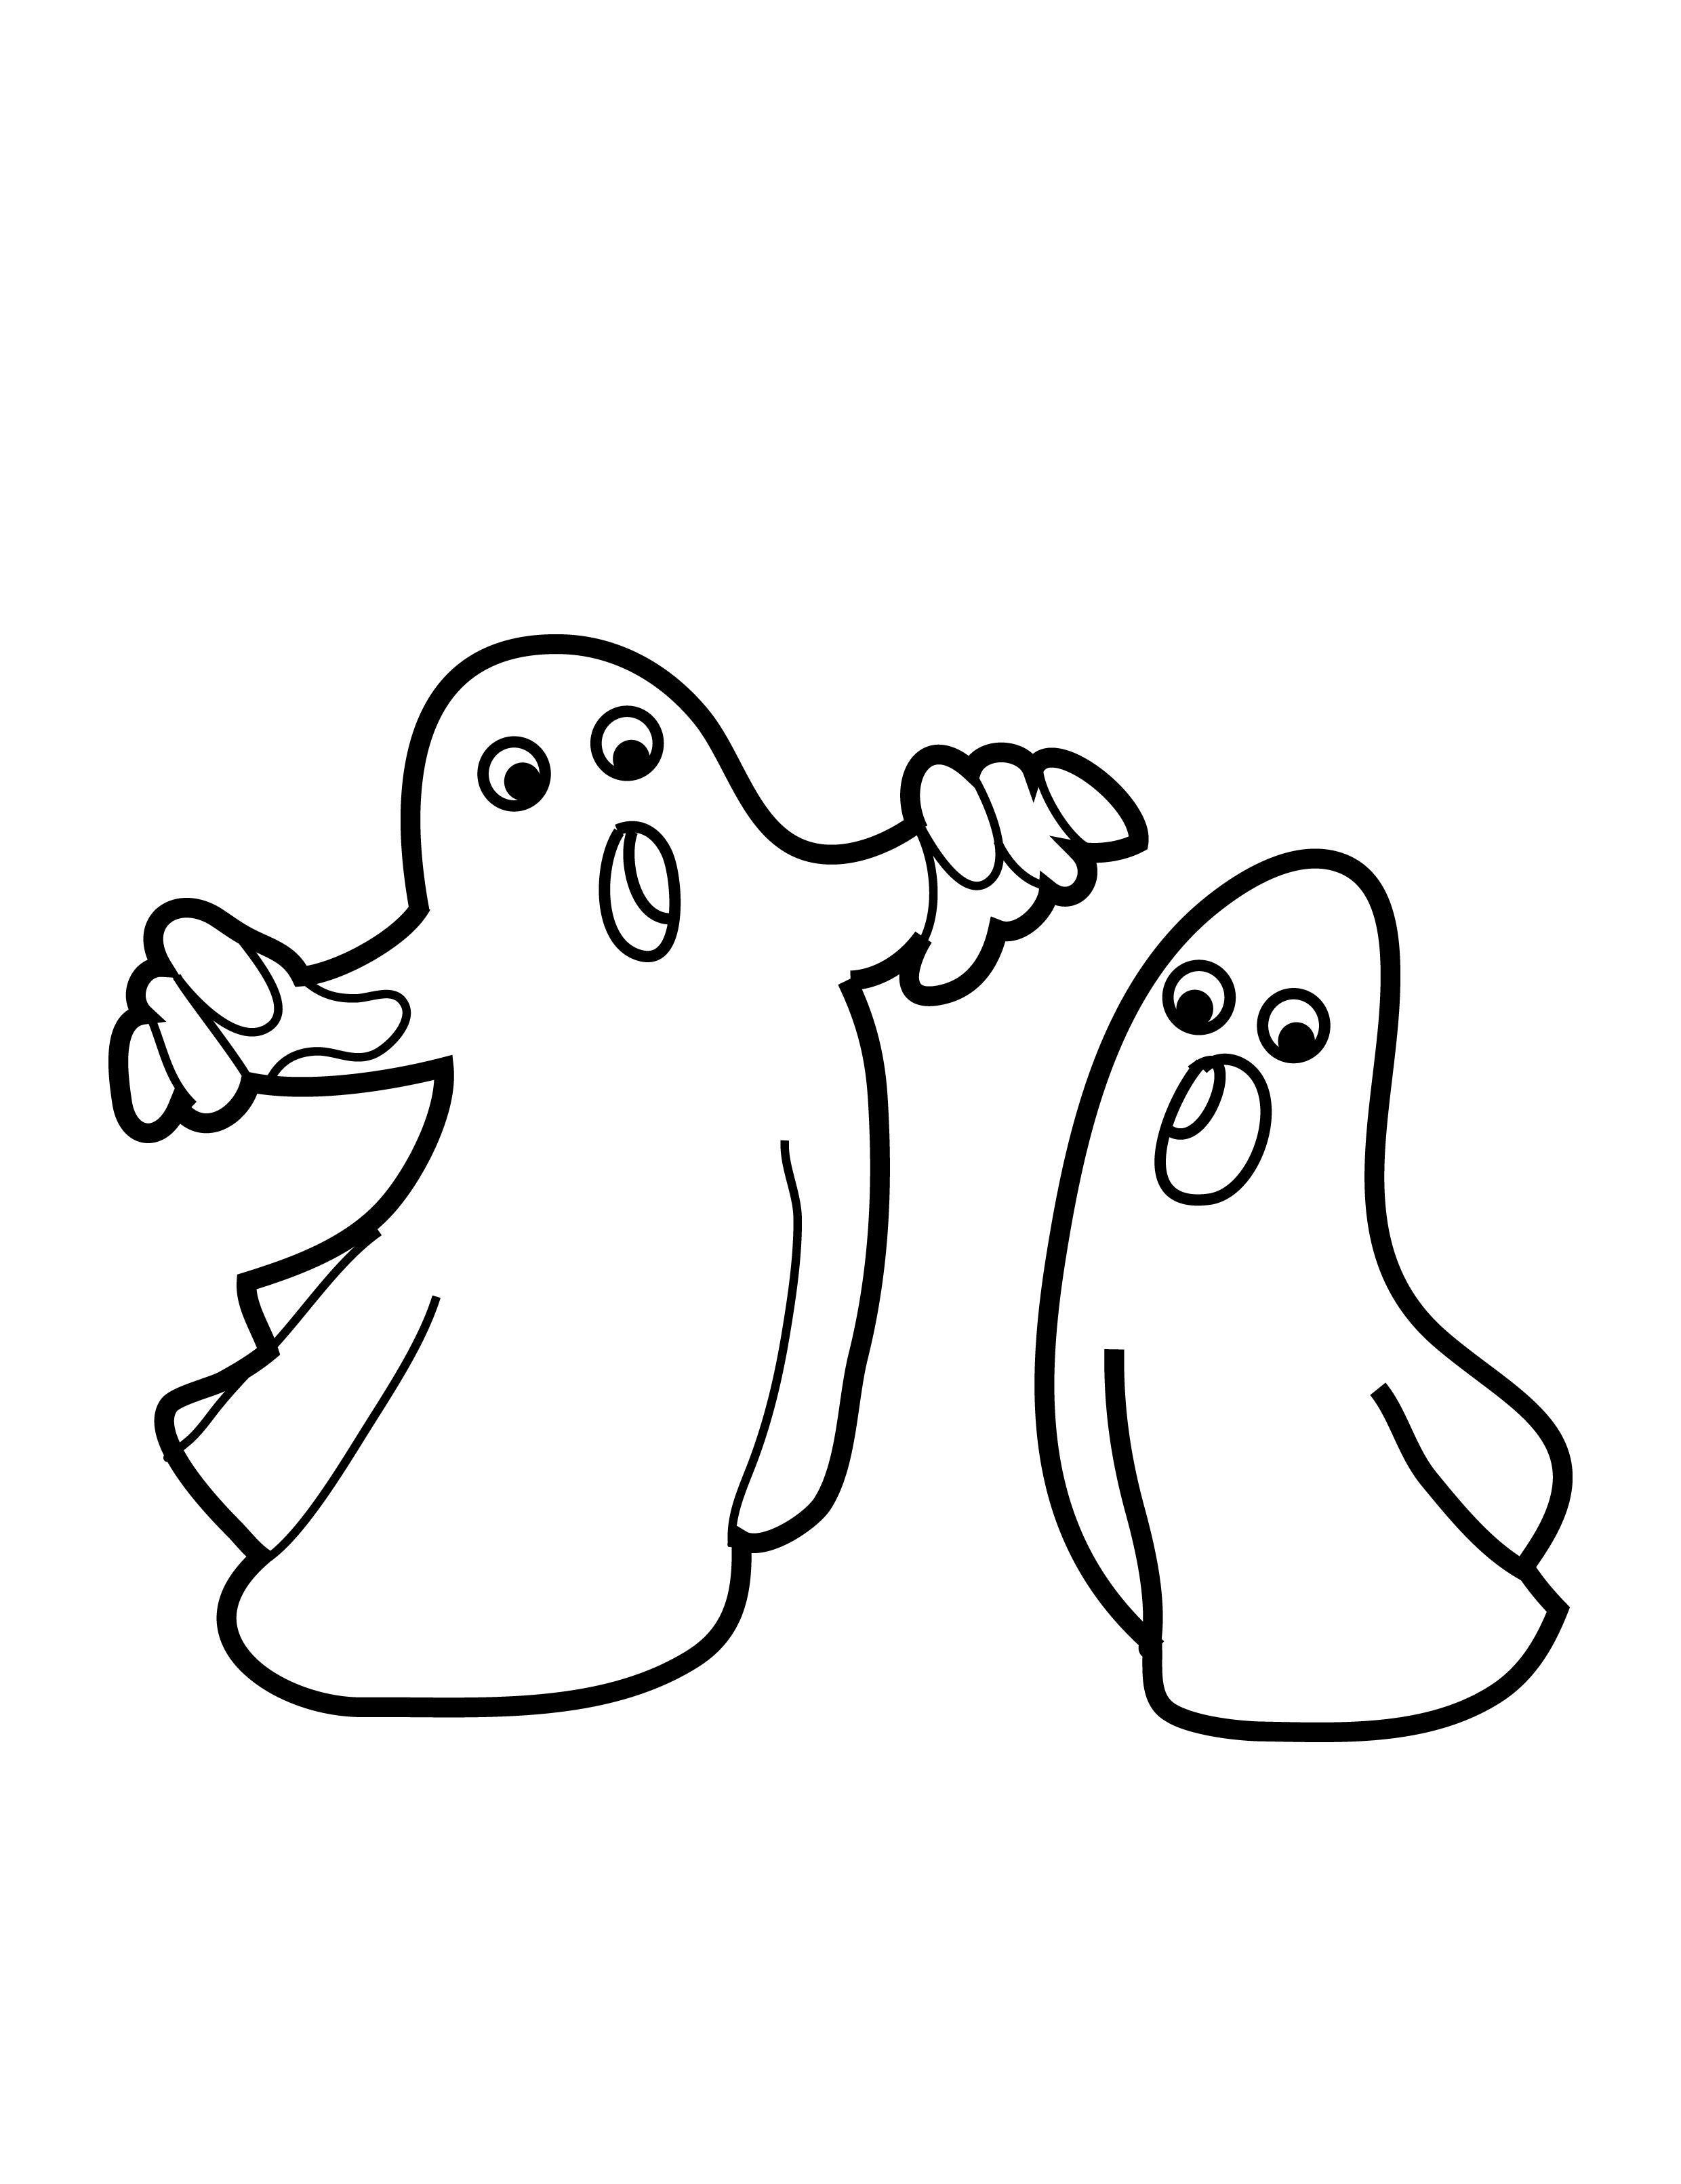 Ghost Kids Coloring Pages - Coloring Home